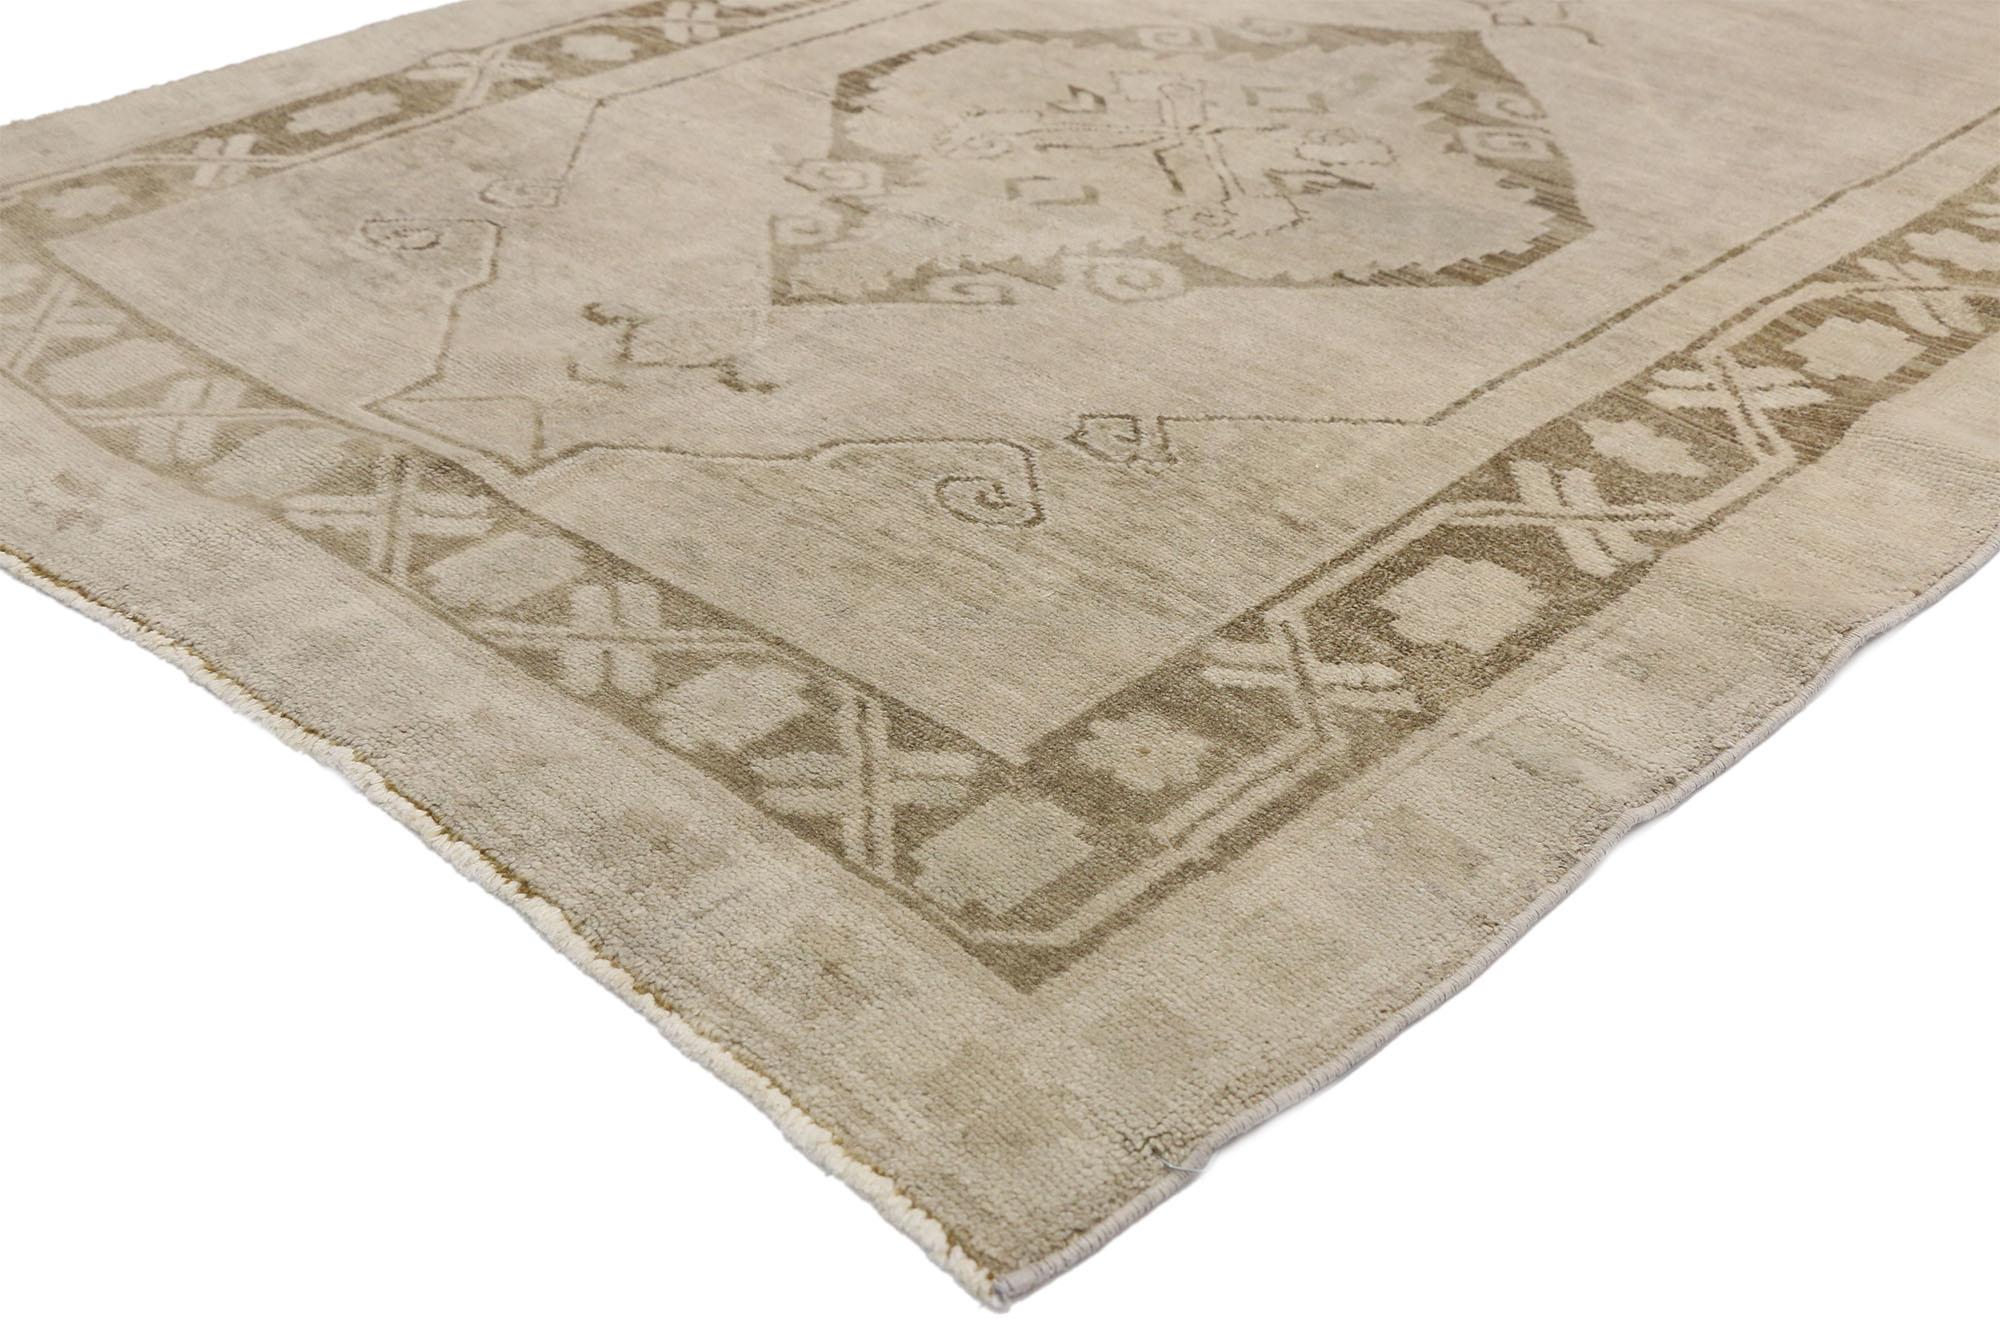 52437 vintage Turkish Oushak runner with Mission style and warm, Earth-Tones 04'06 x 12'05. This hand-knotted wool vintage Turkish Oushak runner features three hexagonal medallions alternate with small bird-like motifs. Each medallion is filled with